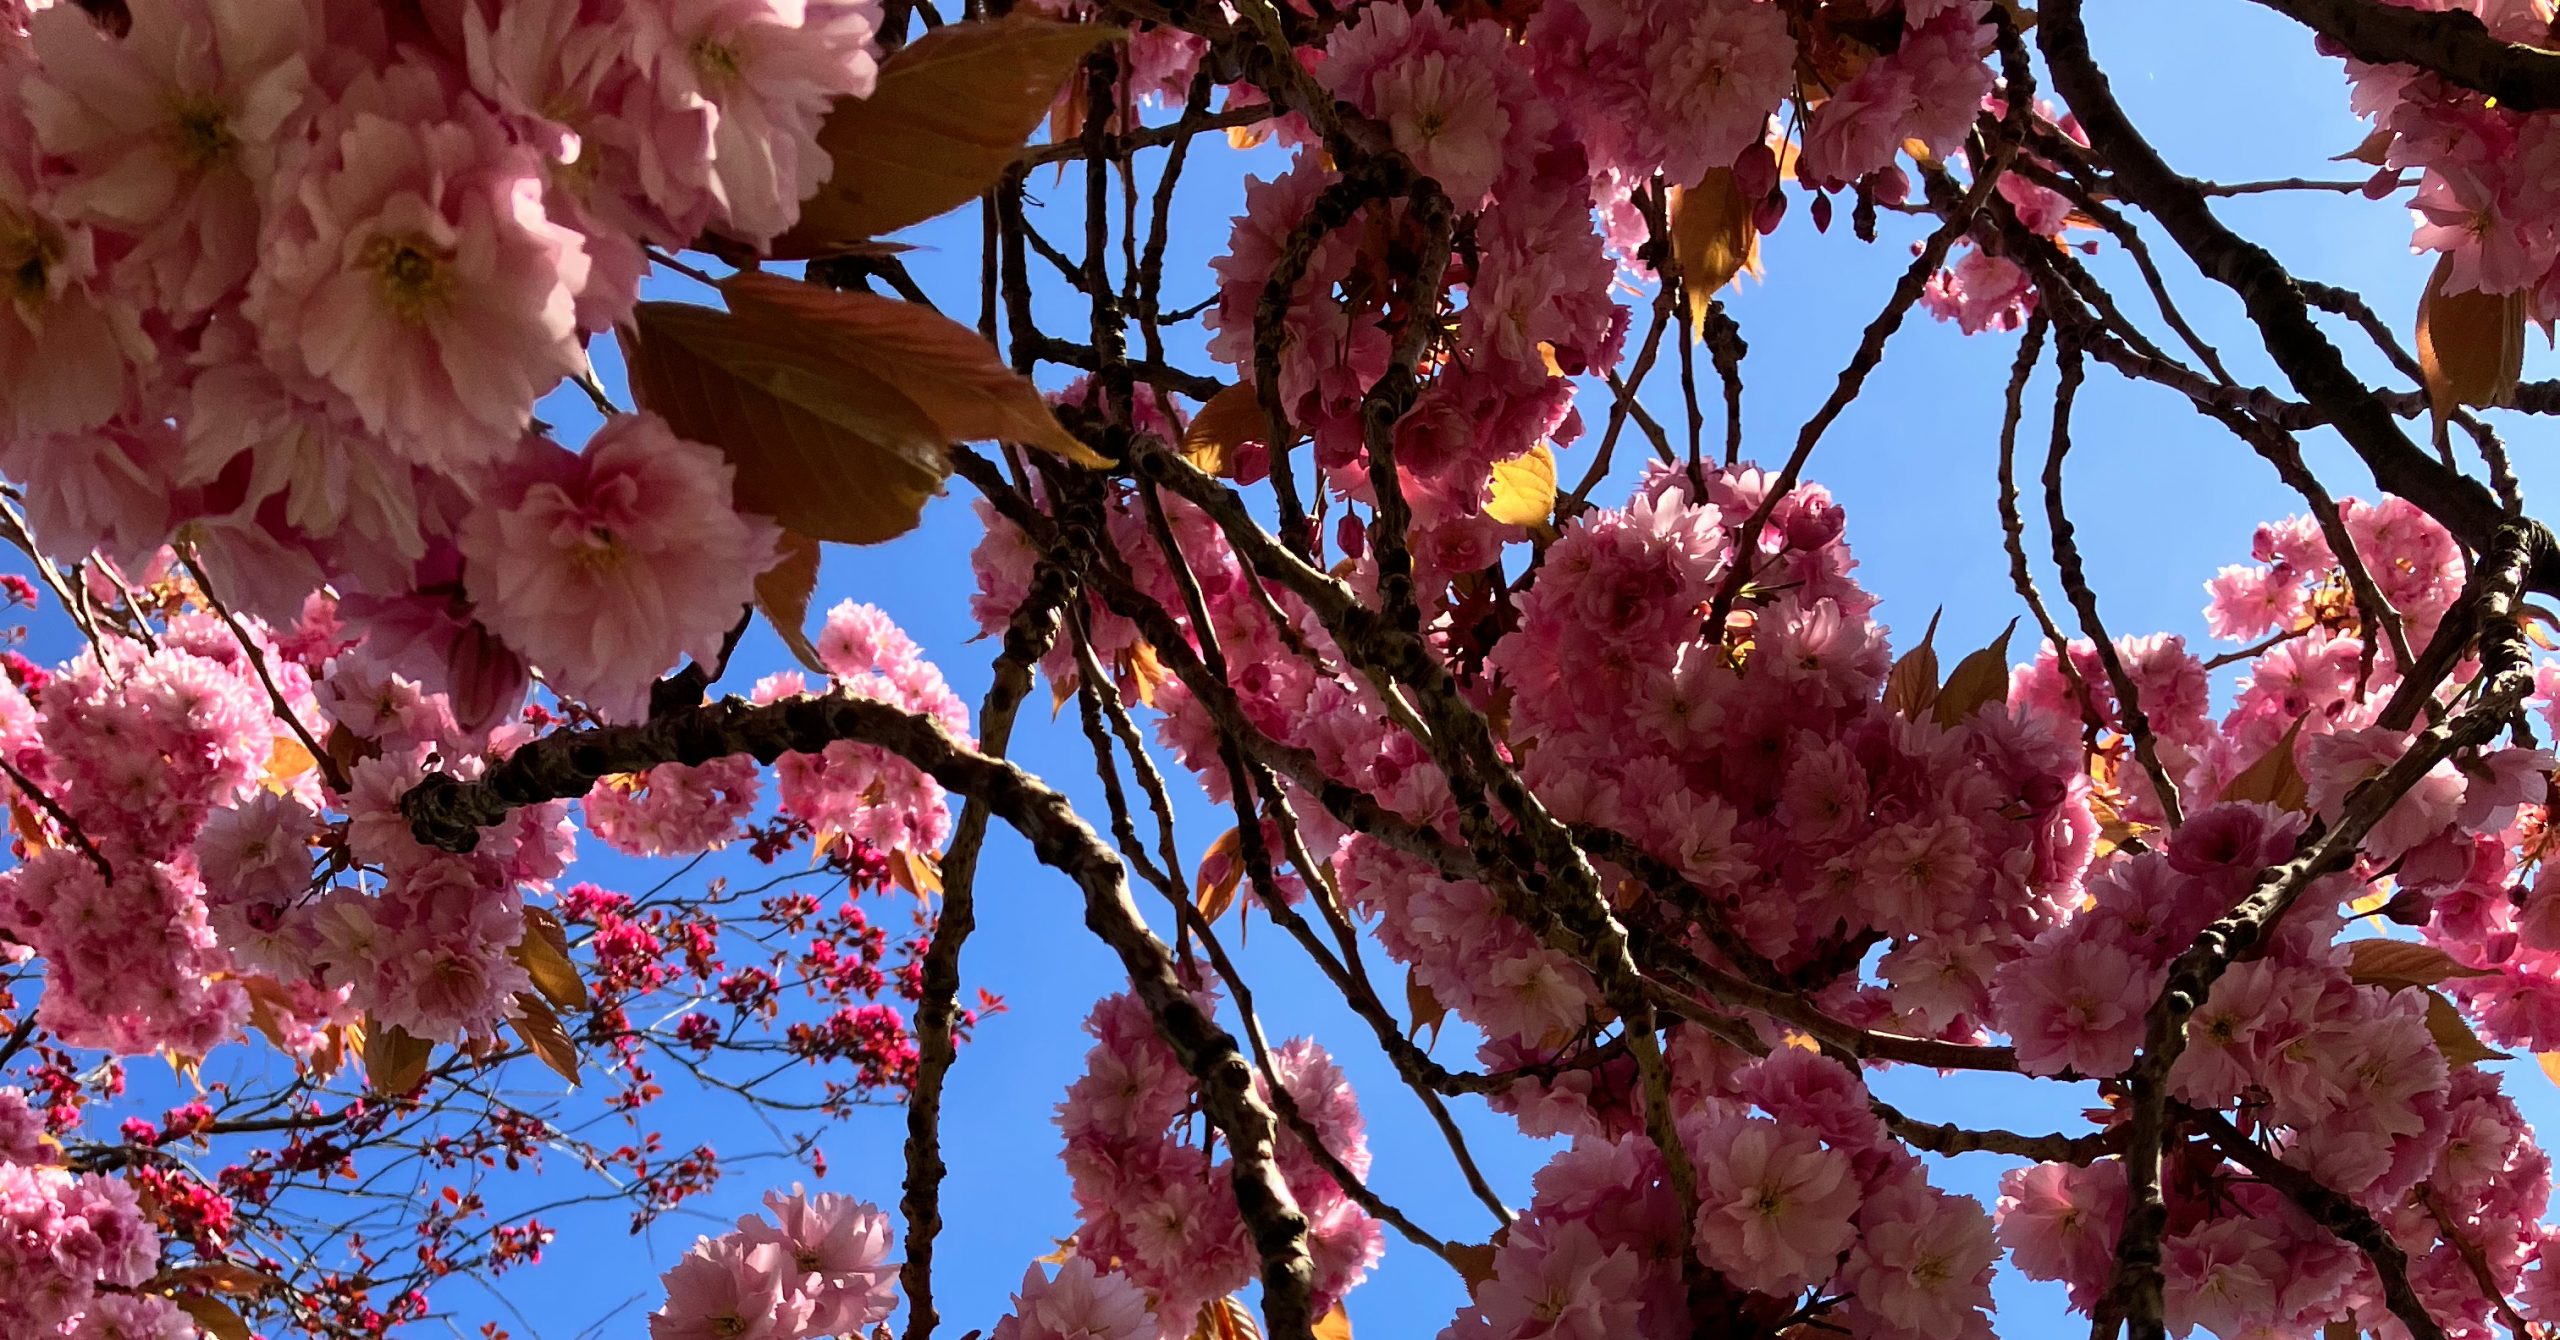 Gallery: photos of the Stray’s cherry blossom from our readers